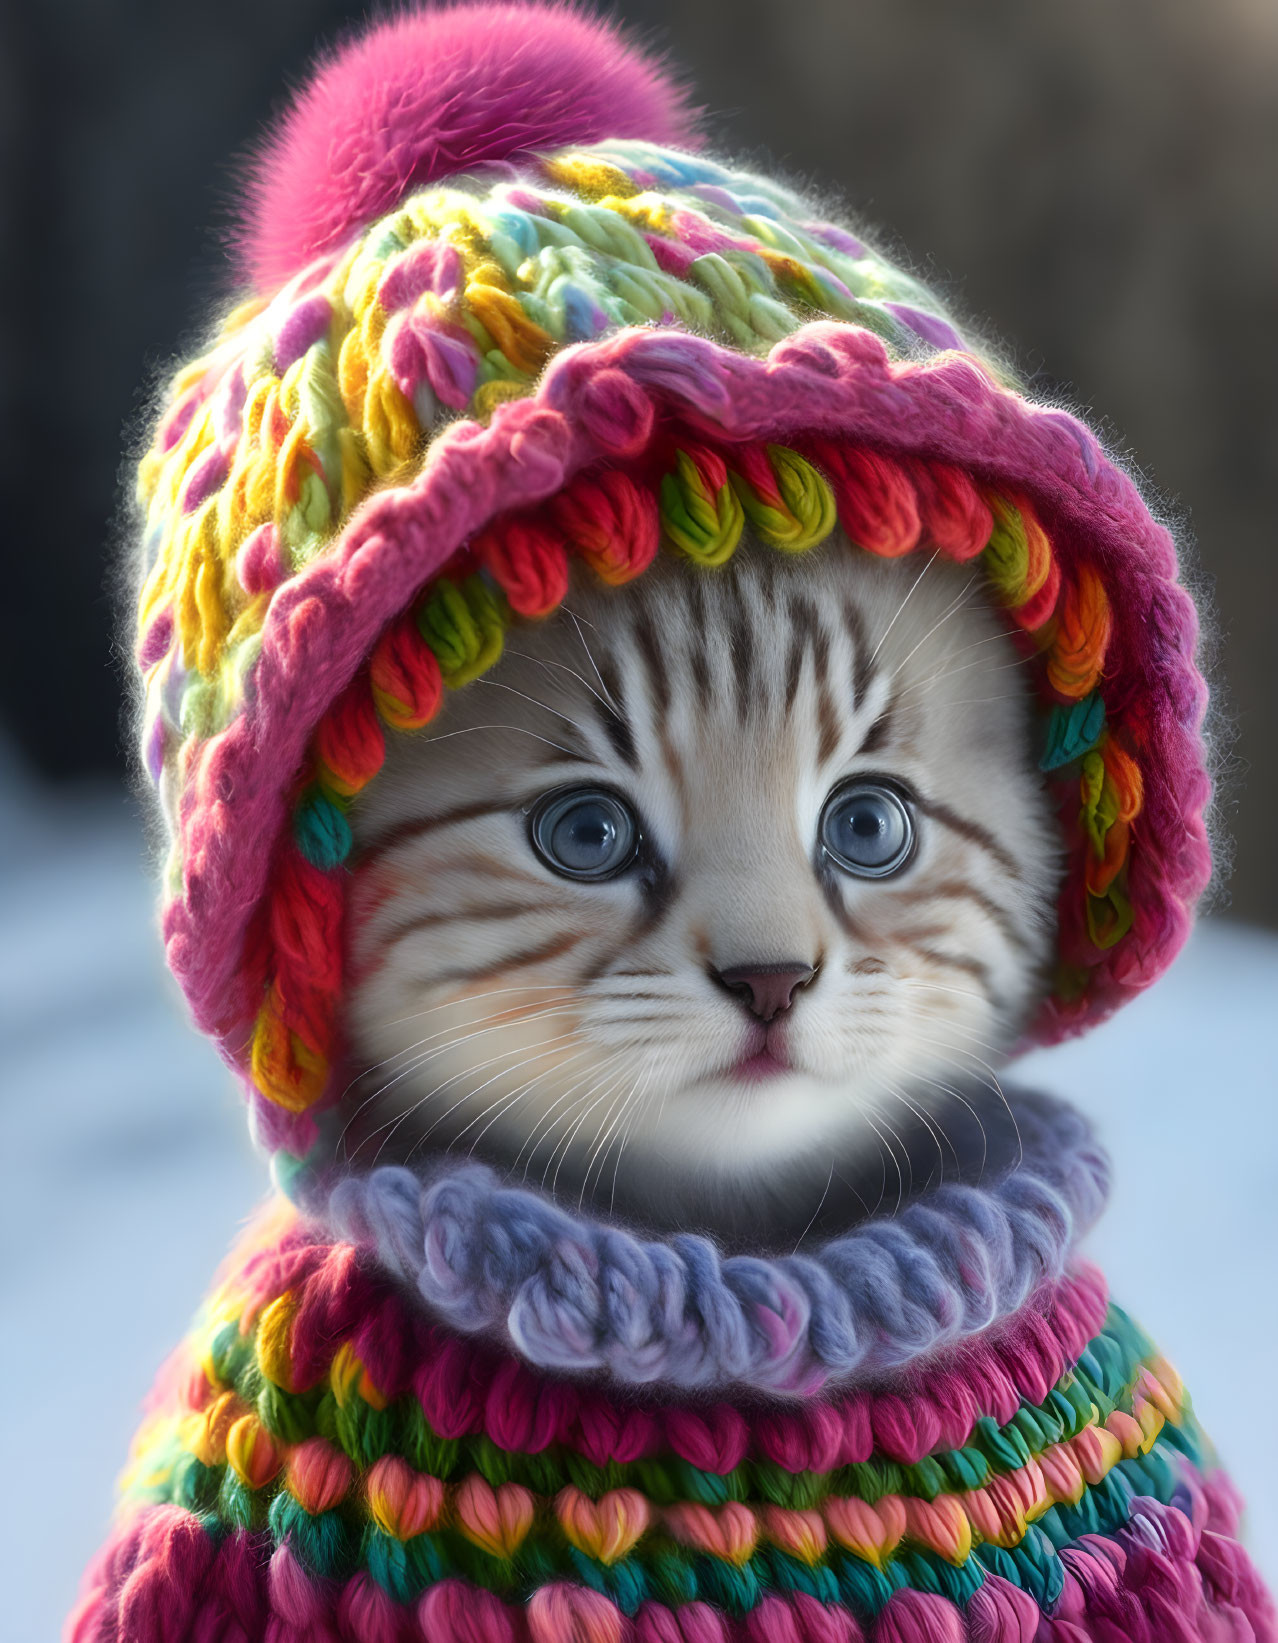 Blue-eyed kitten in colorful knitted hat and scarf cozy and adorable